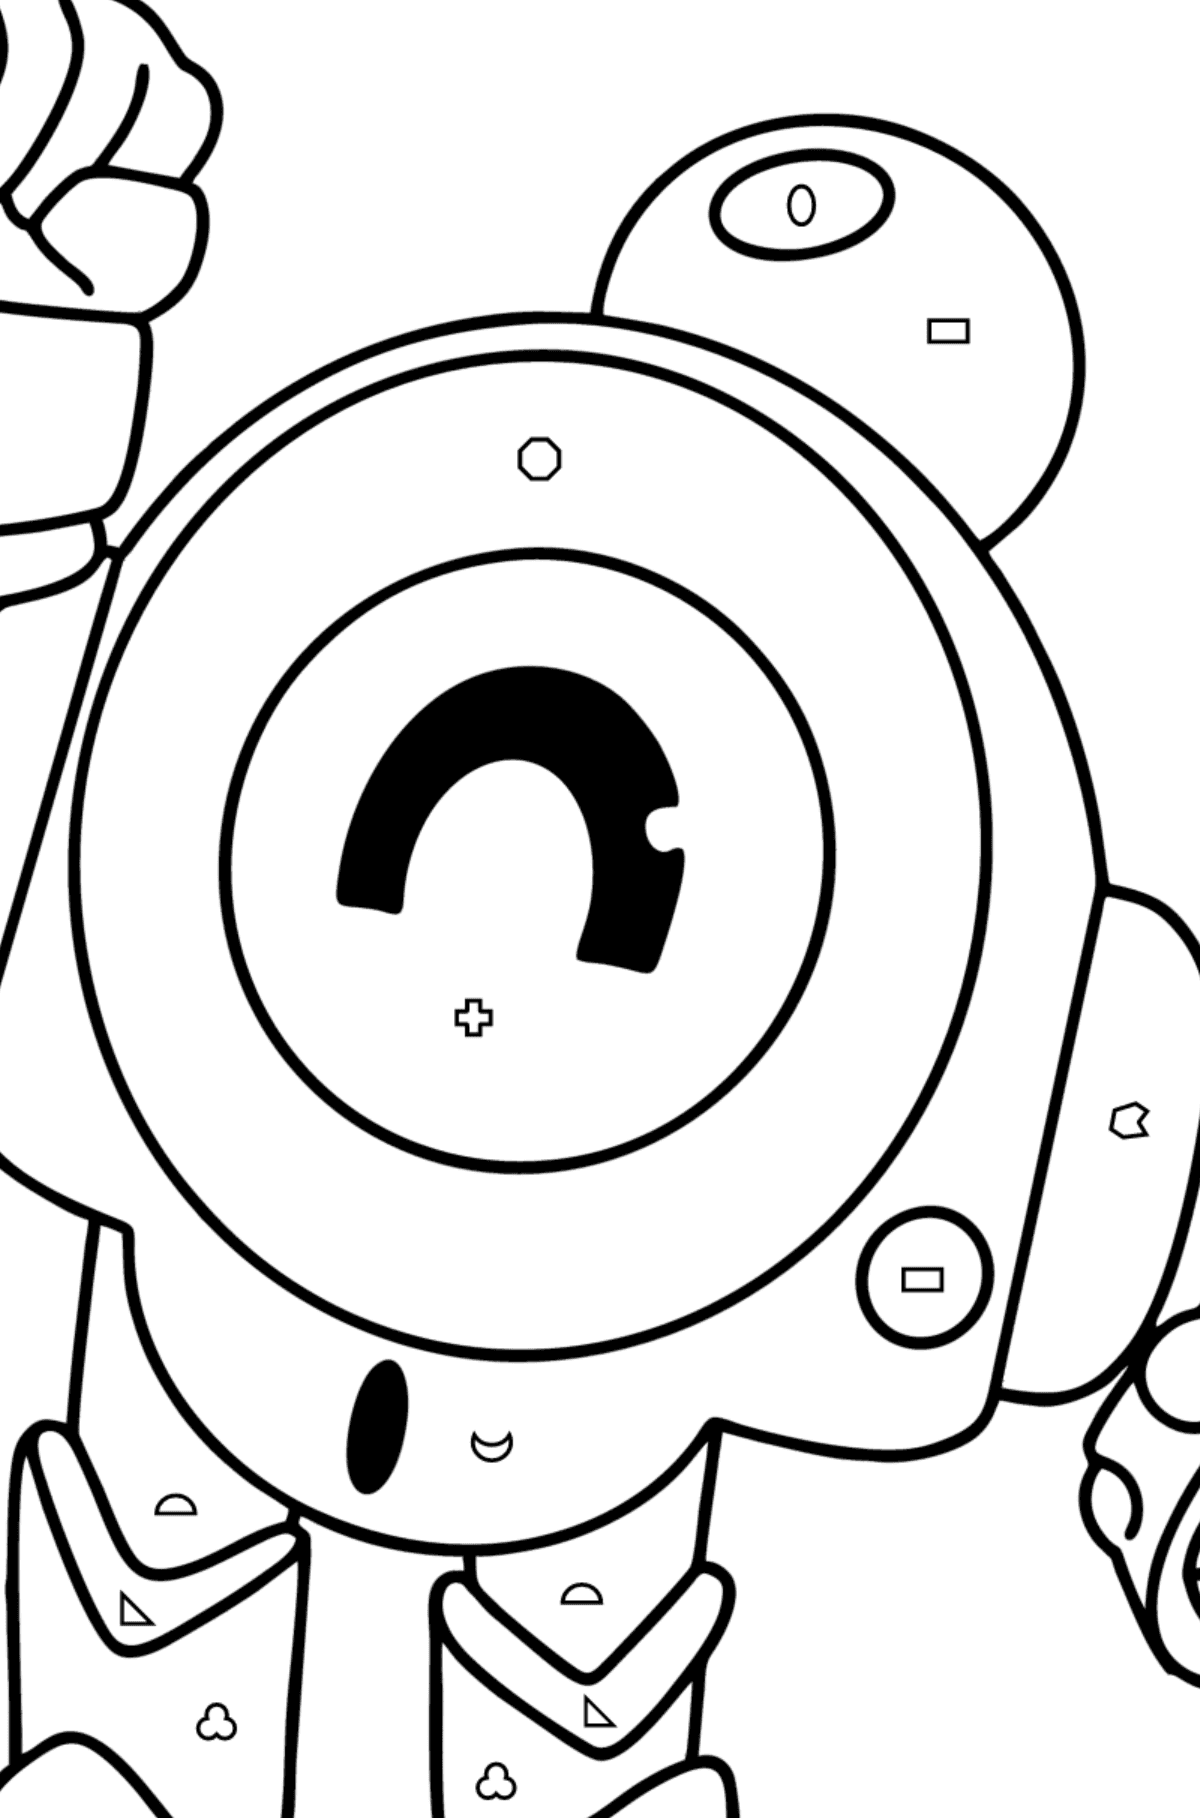 Brawl Stars Nani coloring page - Coloring by Geometric Shapes for Kids